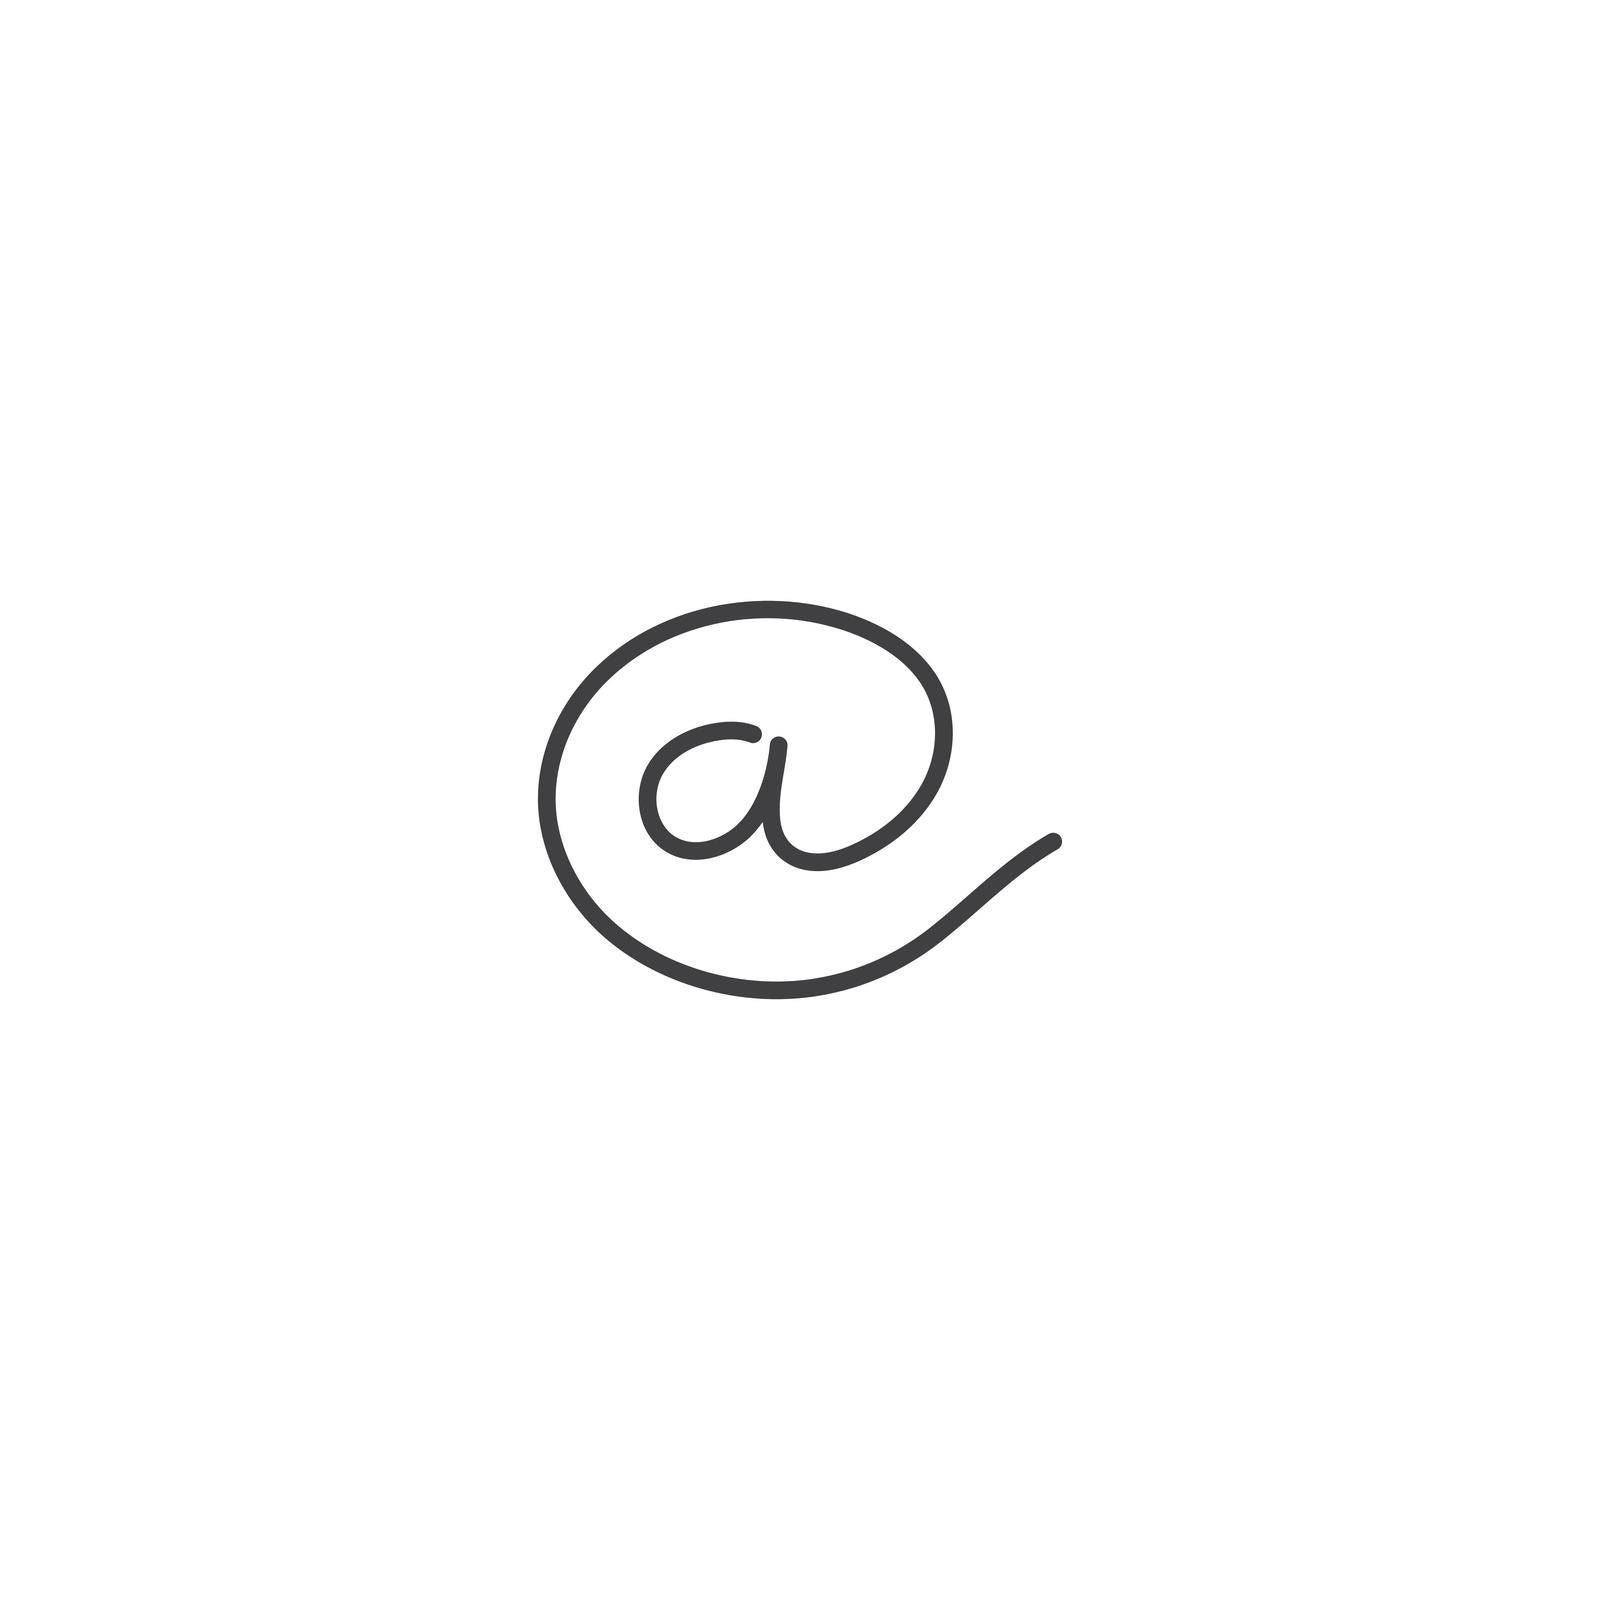 Mail icon by awk